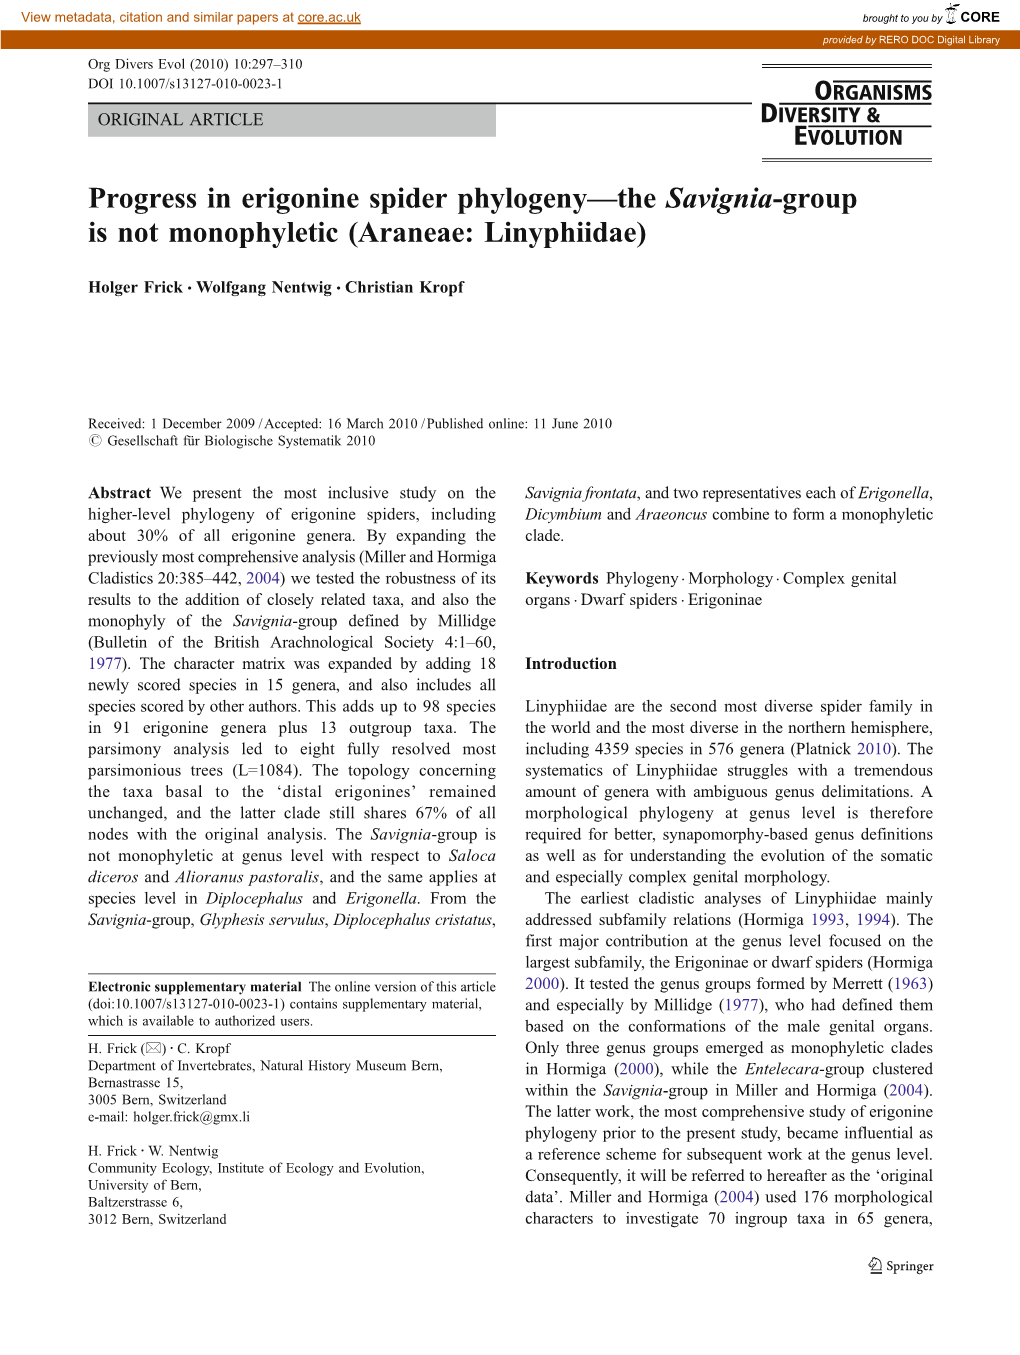 Progress in Erigonine Spider Phylogeny—The Savignia-Group Is Not Monophyletic (Araneae: Linyphiidae)